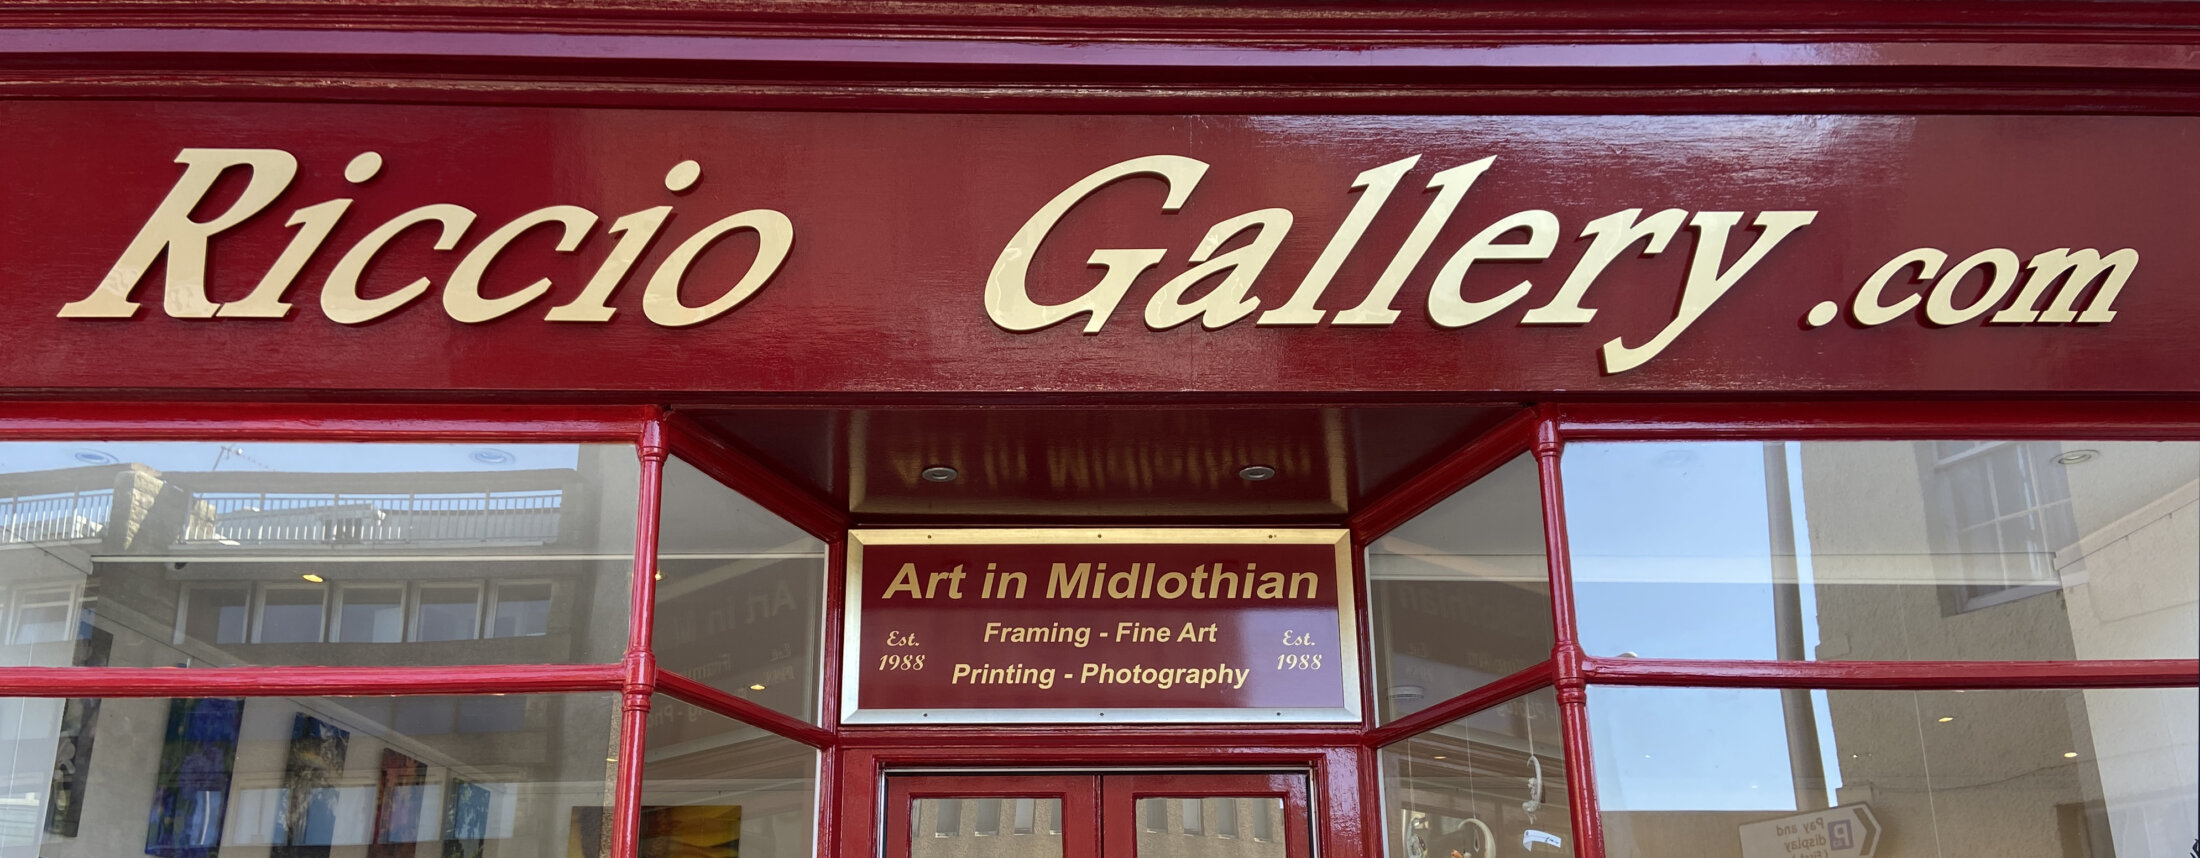 Riccio Gallery - freshly painted for 26 April 2021!